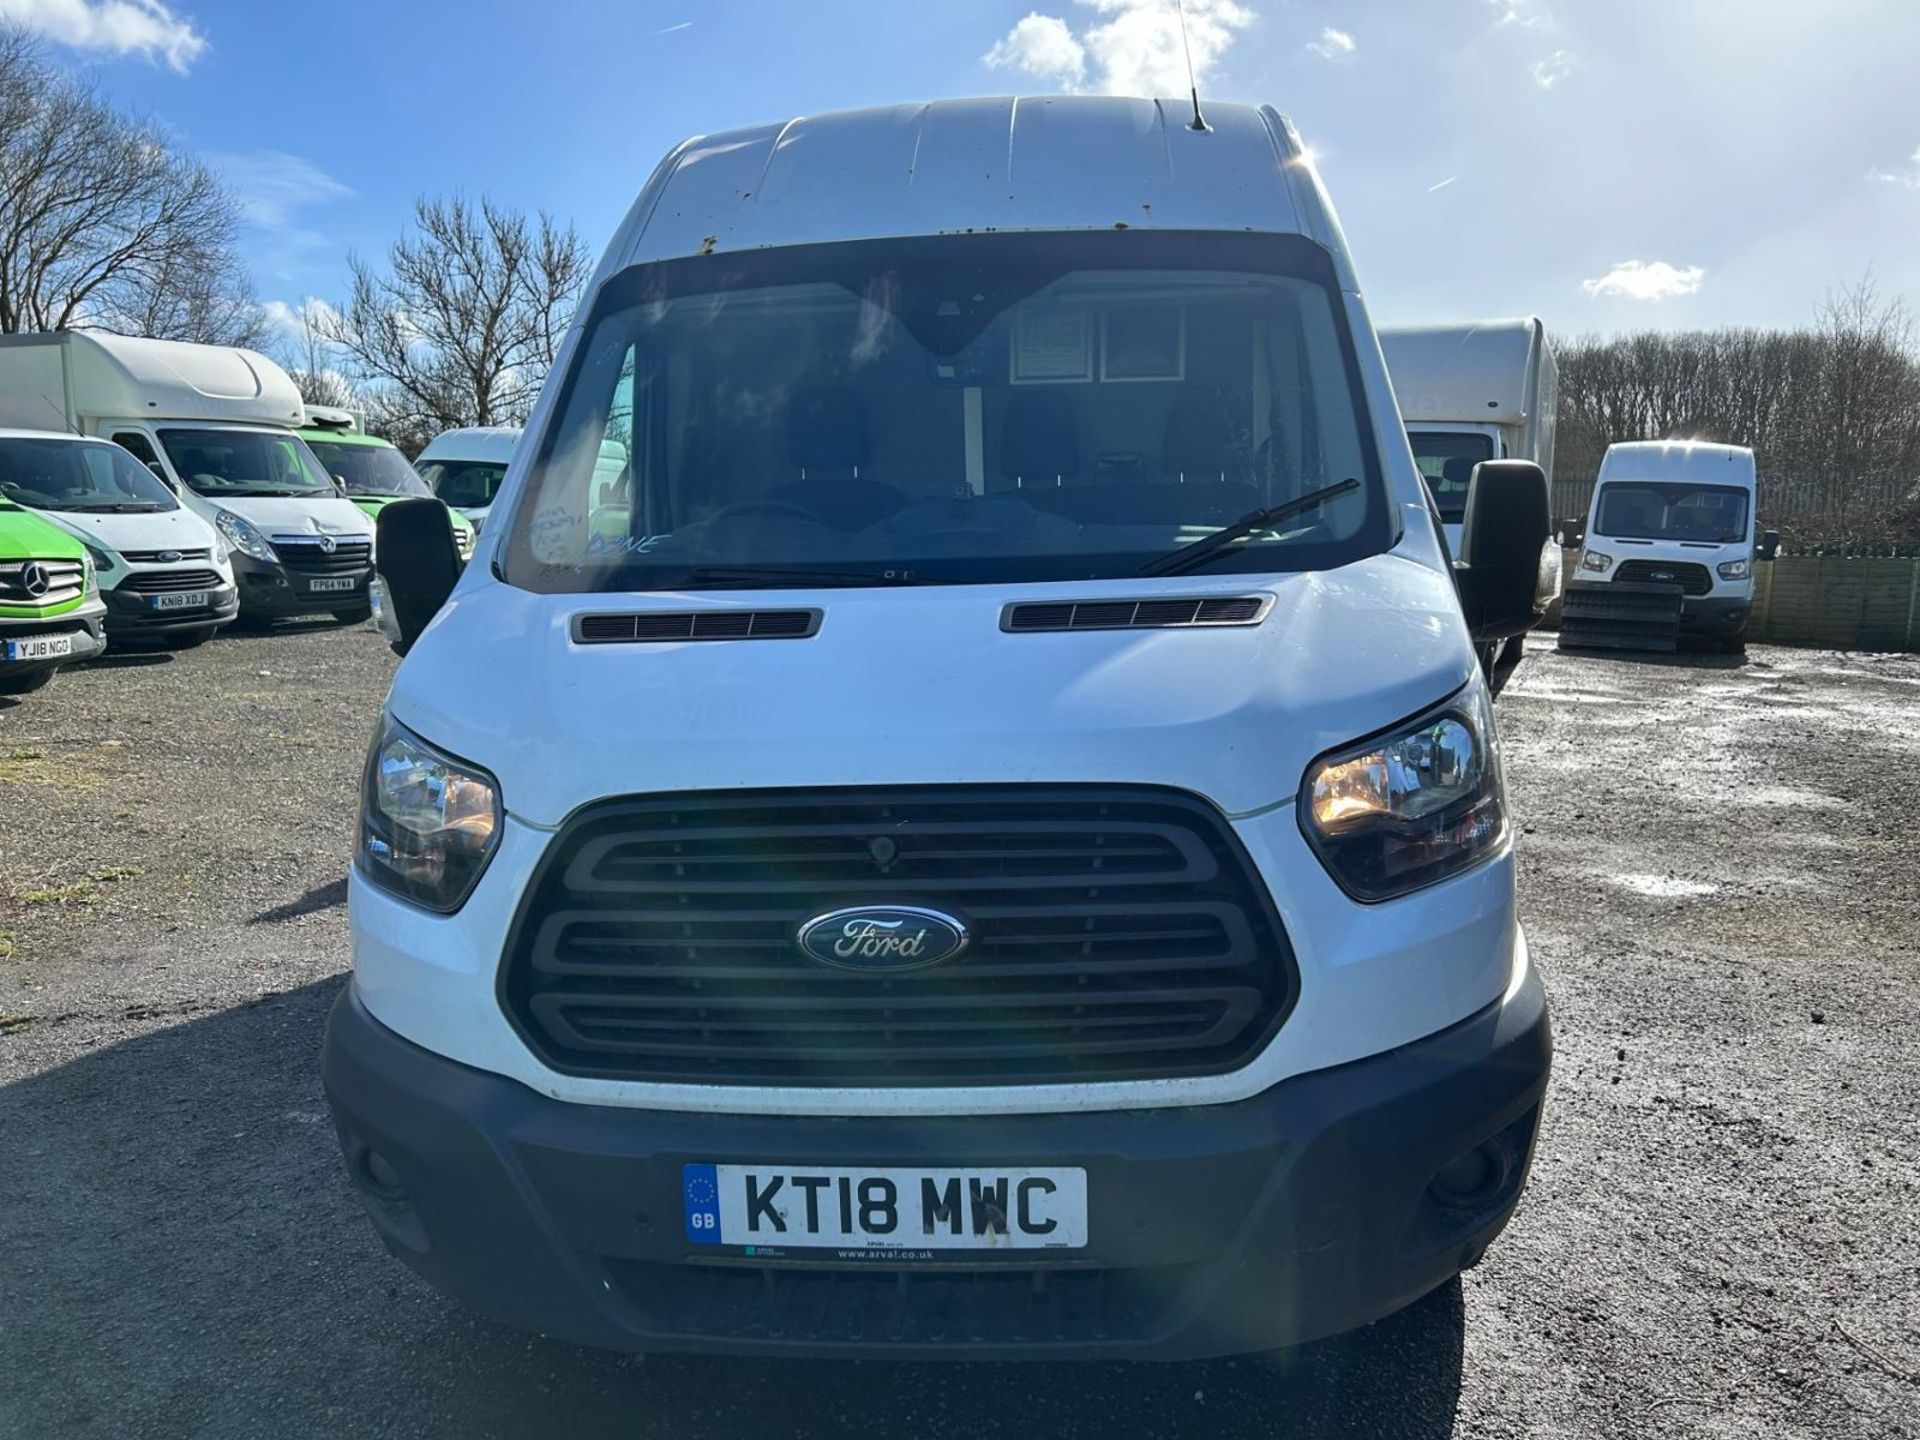 2018 FORD TRANSIT 2.0 TDCI 130PS L3 H3 - RELIABLE WORKHORSE FOR YOUR BUSINESS - Image 2 of 15